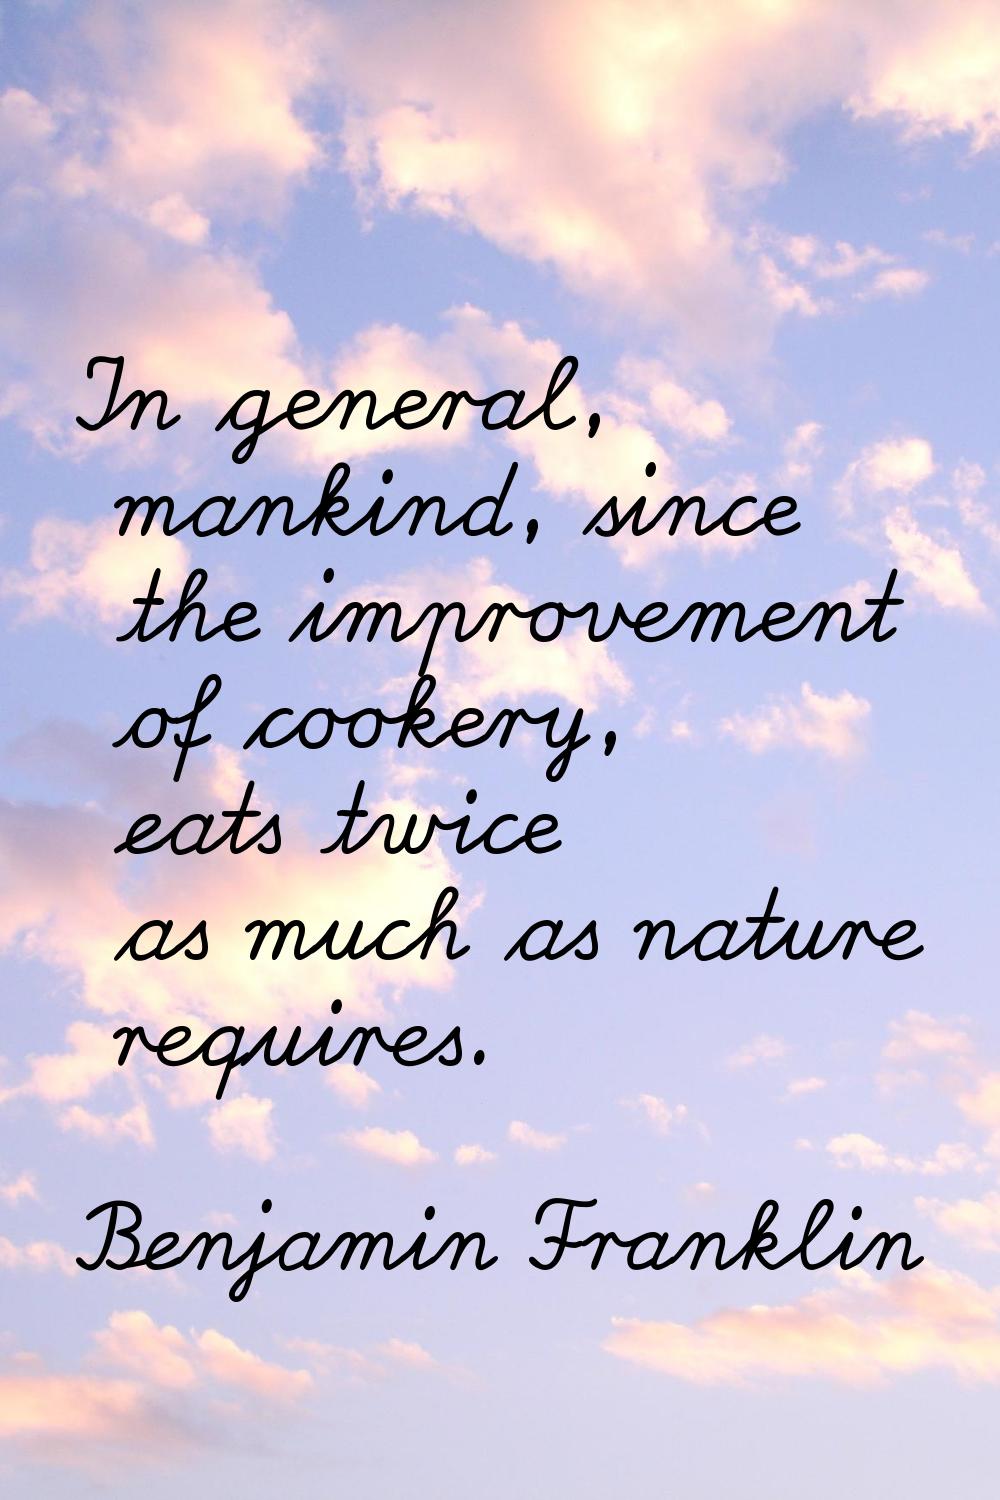 In general, mankind, since the improvement of cookery, eats twice as much as nature requires.